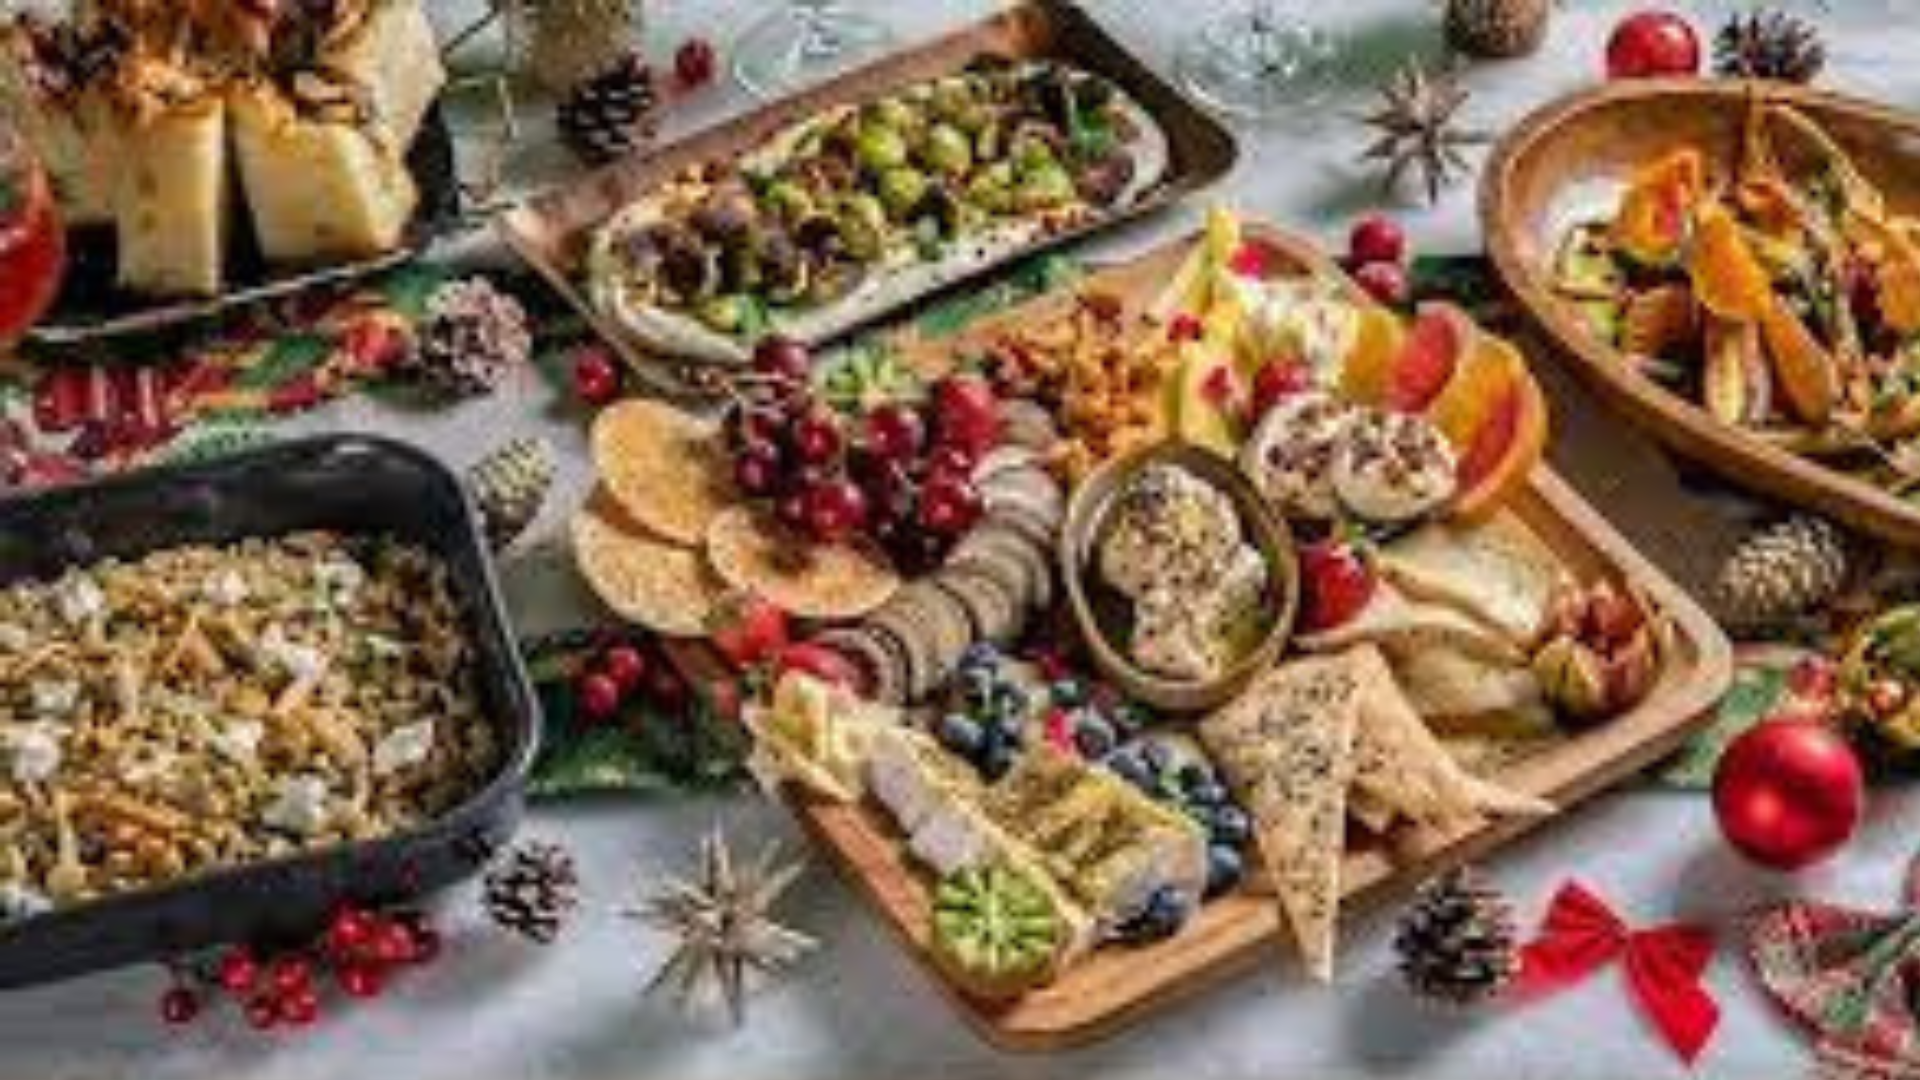 Guilt-free Christmas feasting: 9 tips to indulge mindfully